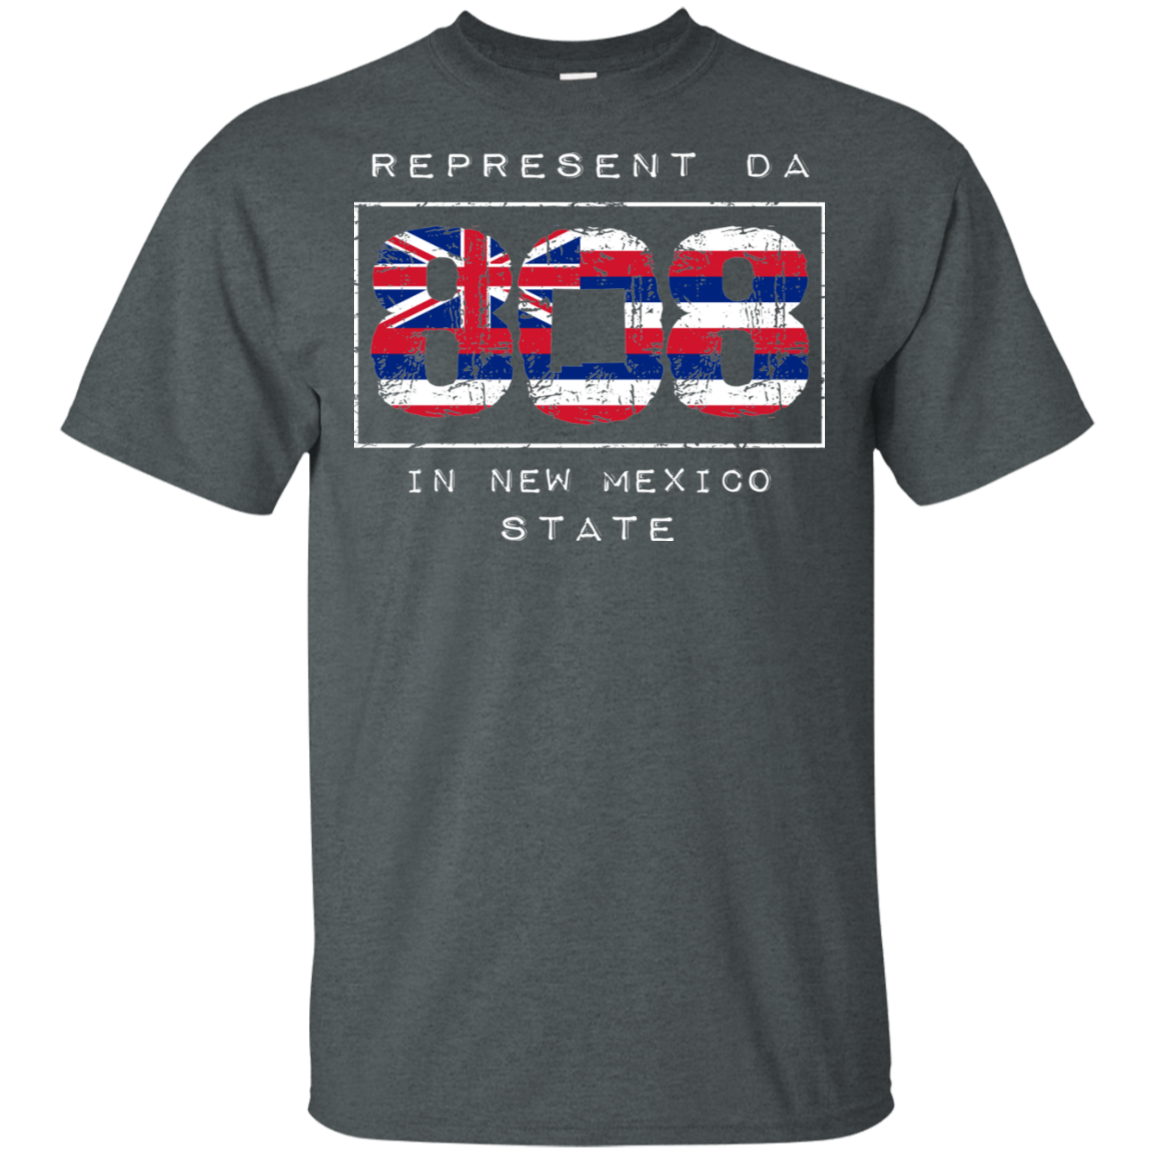 Rep Da 808 In New Mexico State Ultra Cotton T-Shirt, T-Shirts, Hawaii Nei All Day